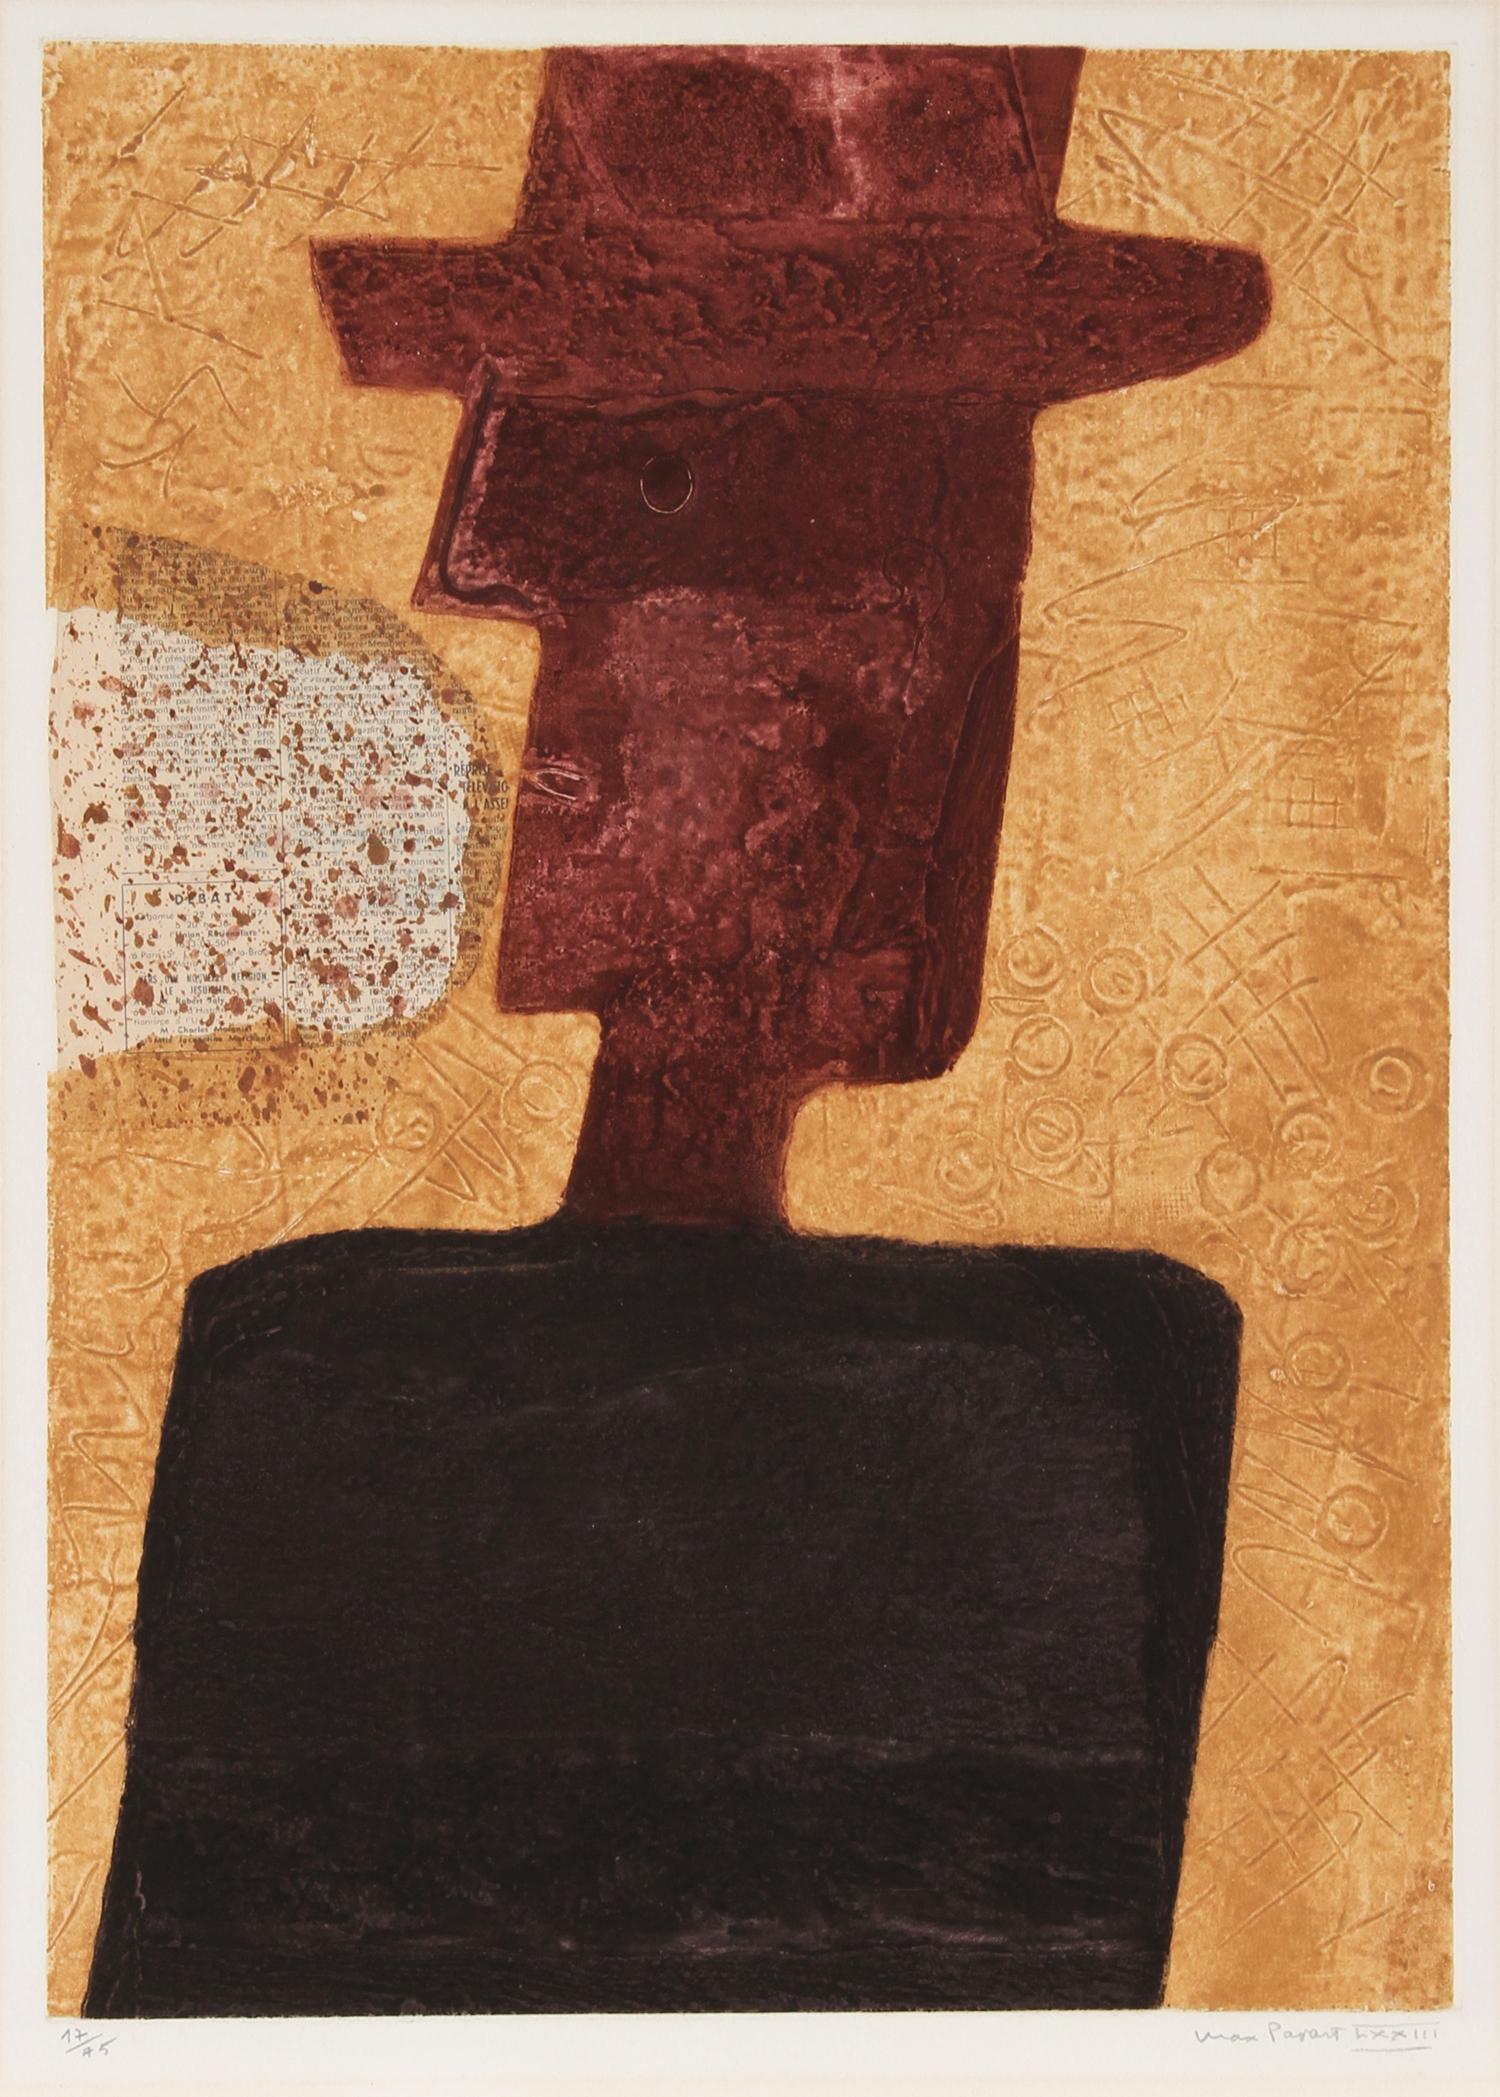 L’Homme au Chapeau by Max Papart, French (1911–1994)
Date: circa 1970
Aquatint Etching and Carborundum, signed and numbered in pencil
Edition of 17/75
Image Size: 23 x 16.5 inches
Size: 28.5 in. x 22 in. (72.39 cm x 55.88 cm)